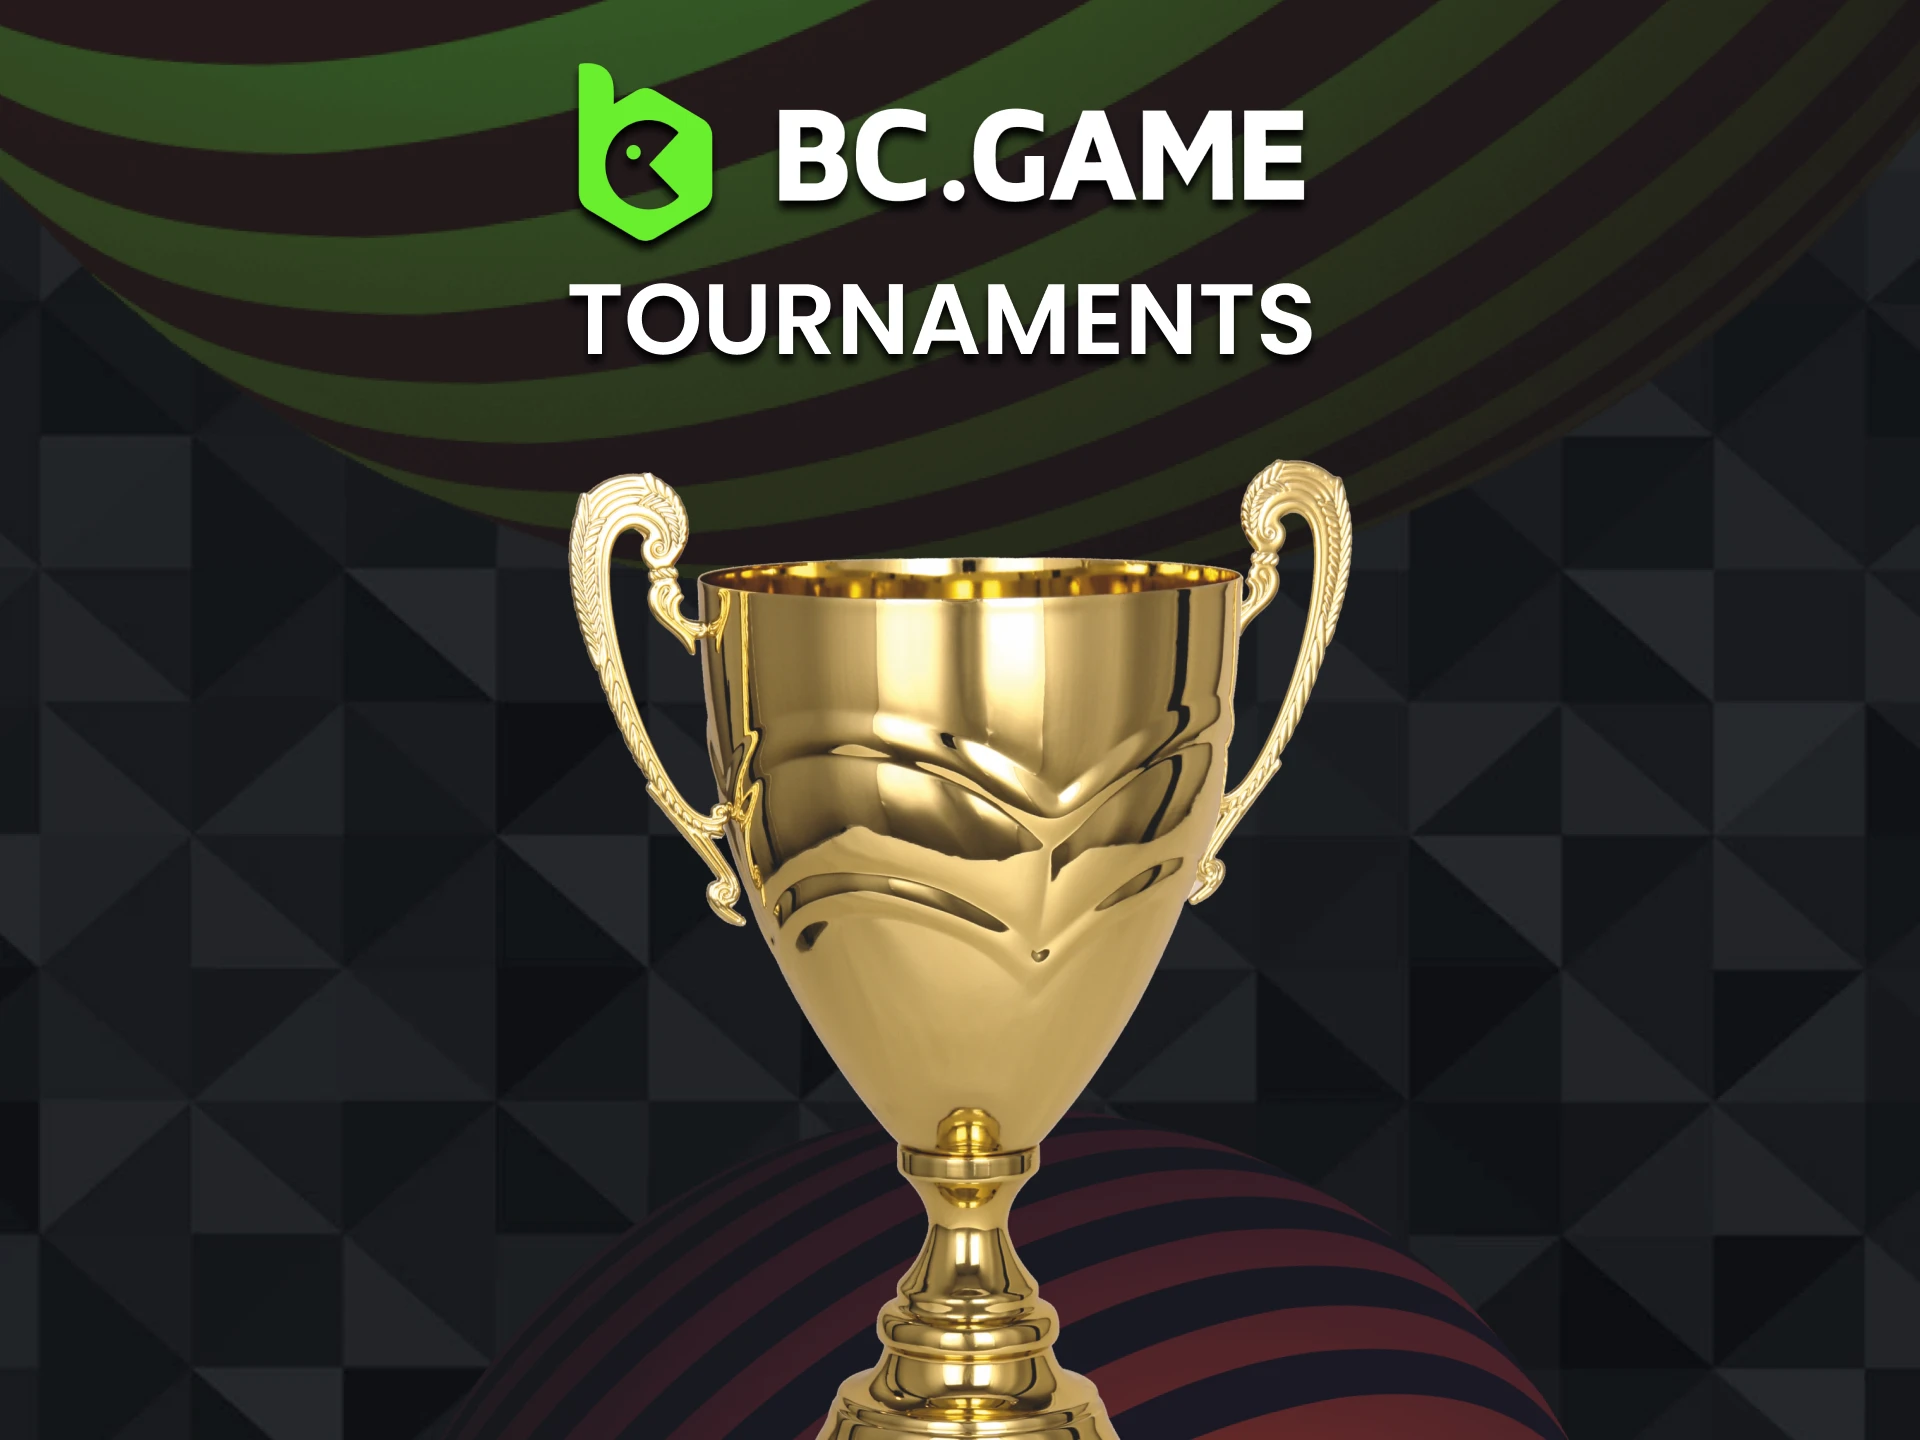 BC Game has the most popular horse racing tournaments for betting.